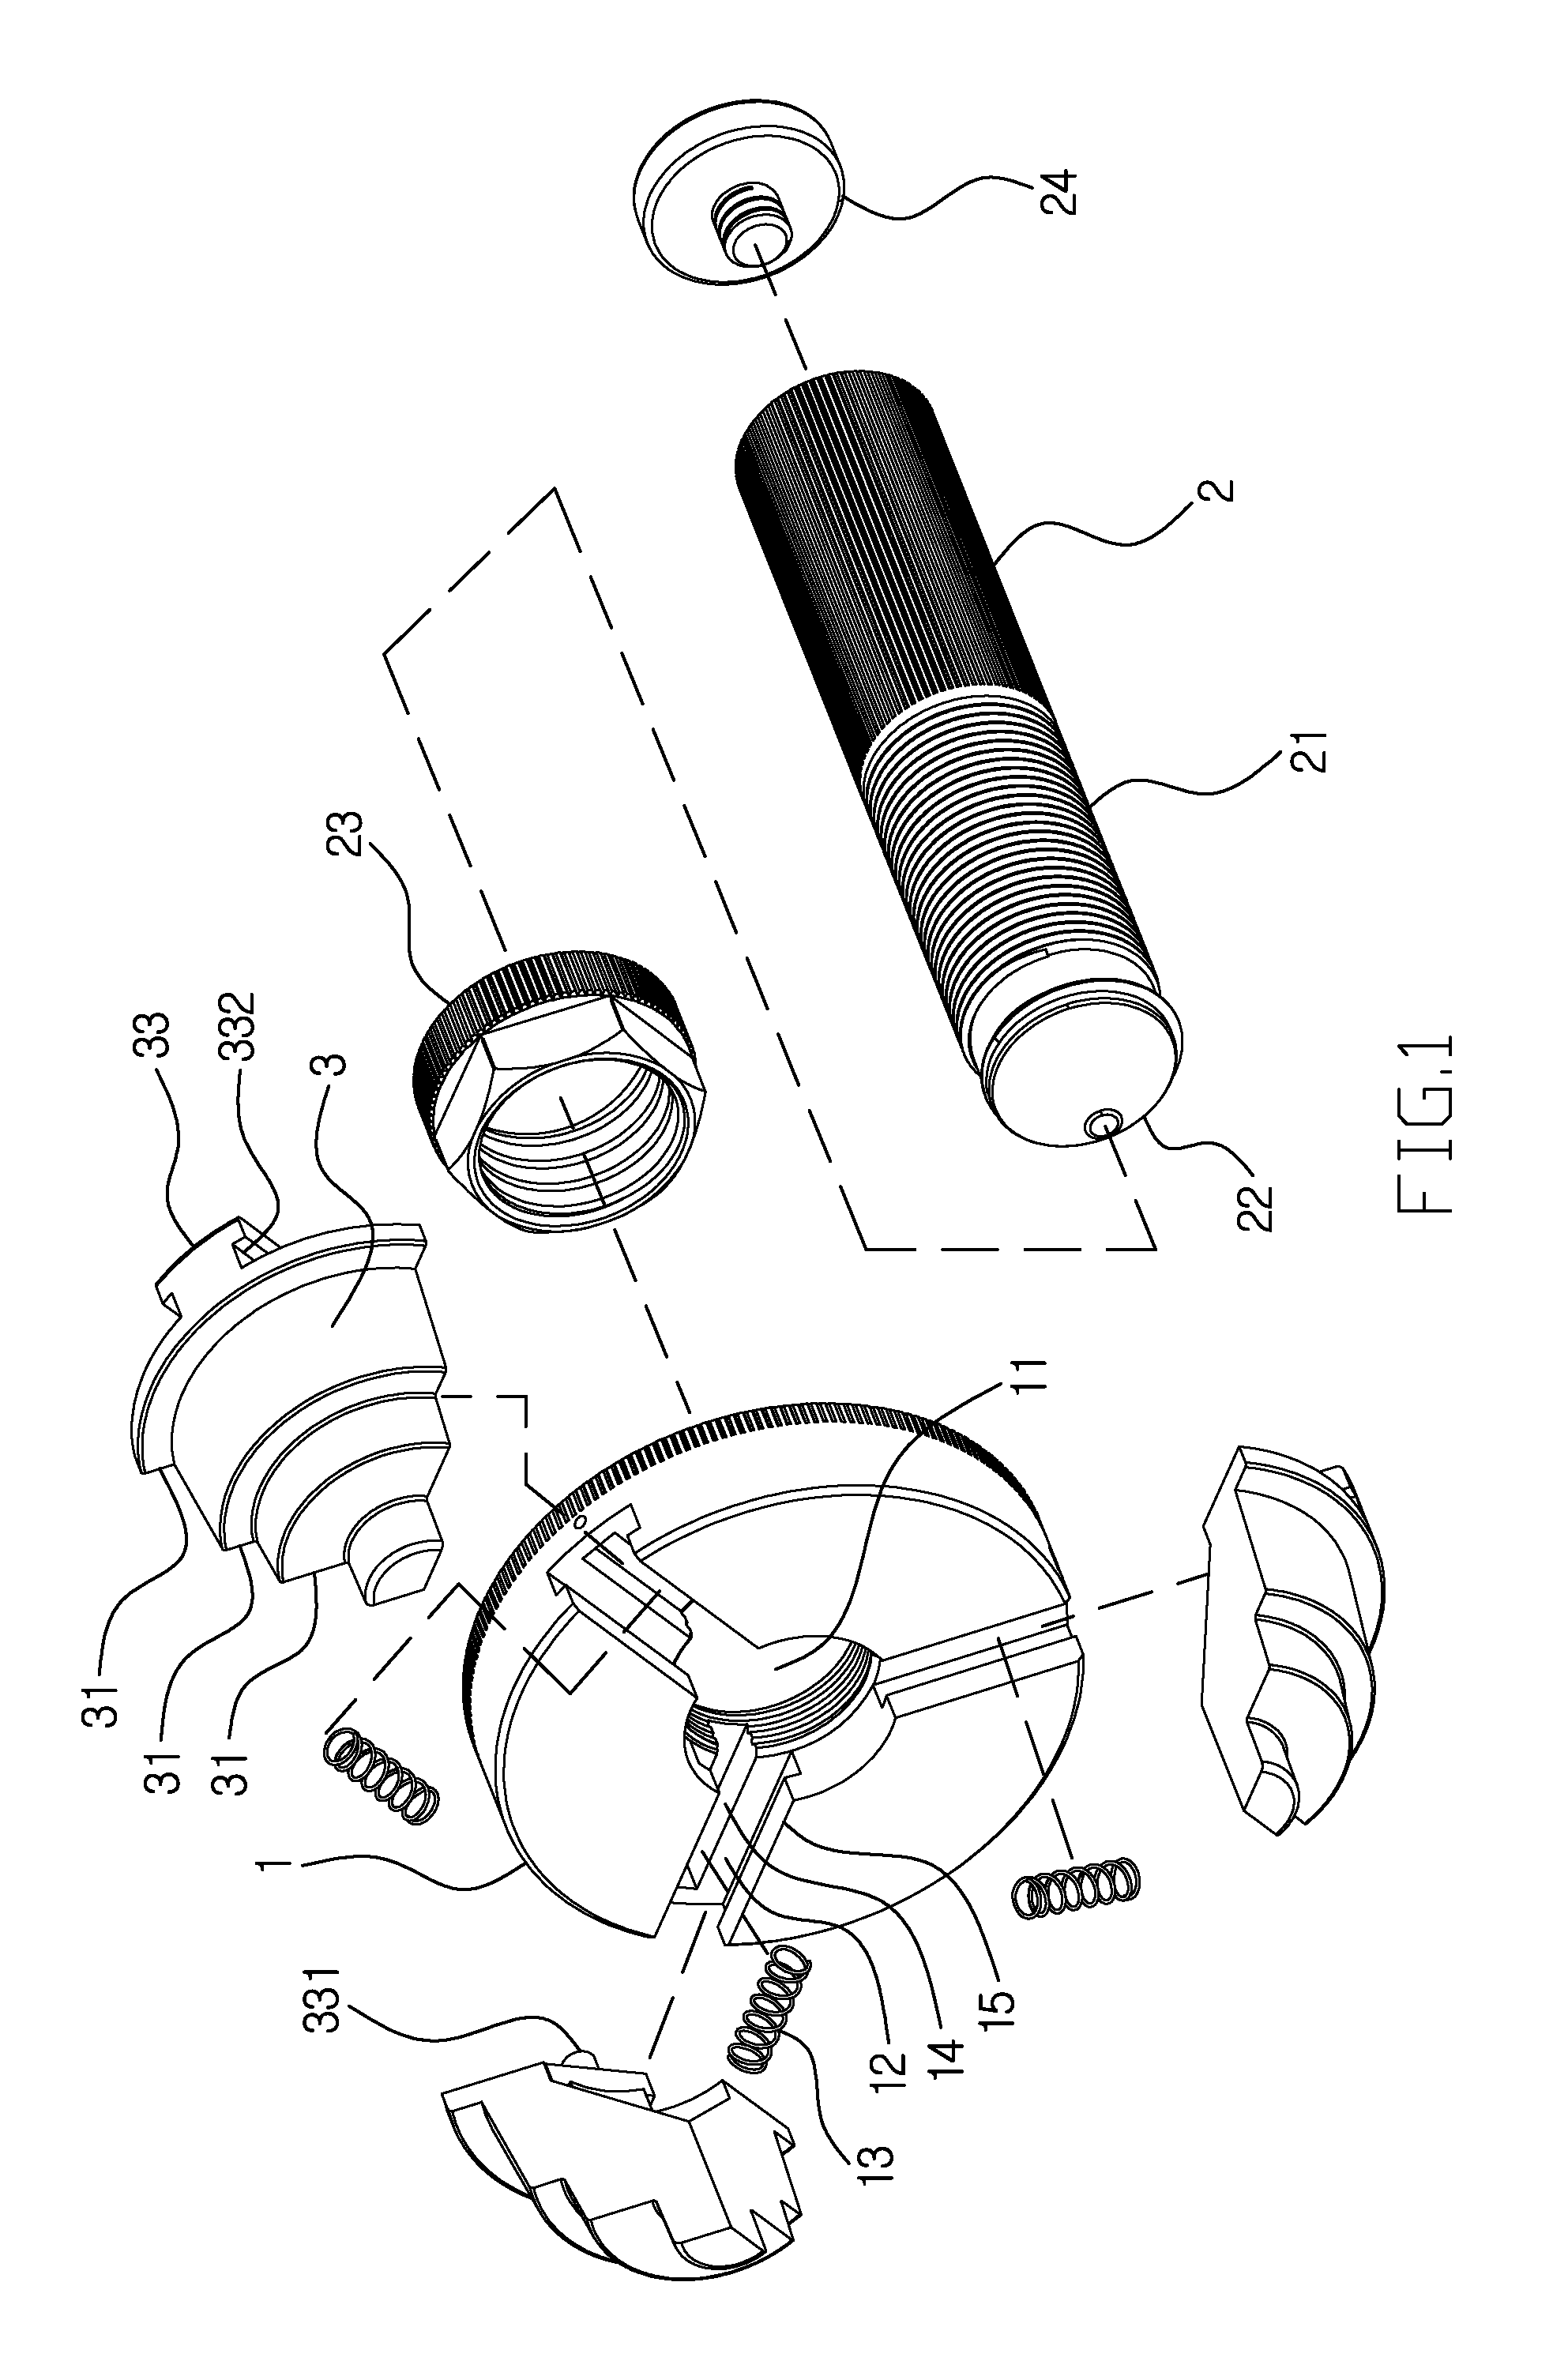 Holding tool for fixing bearings